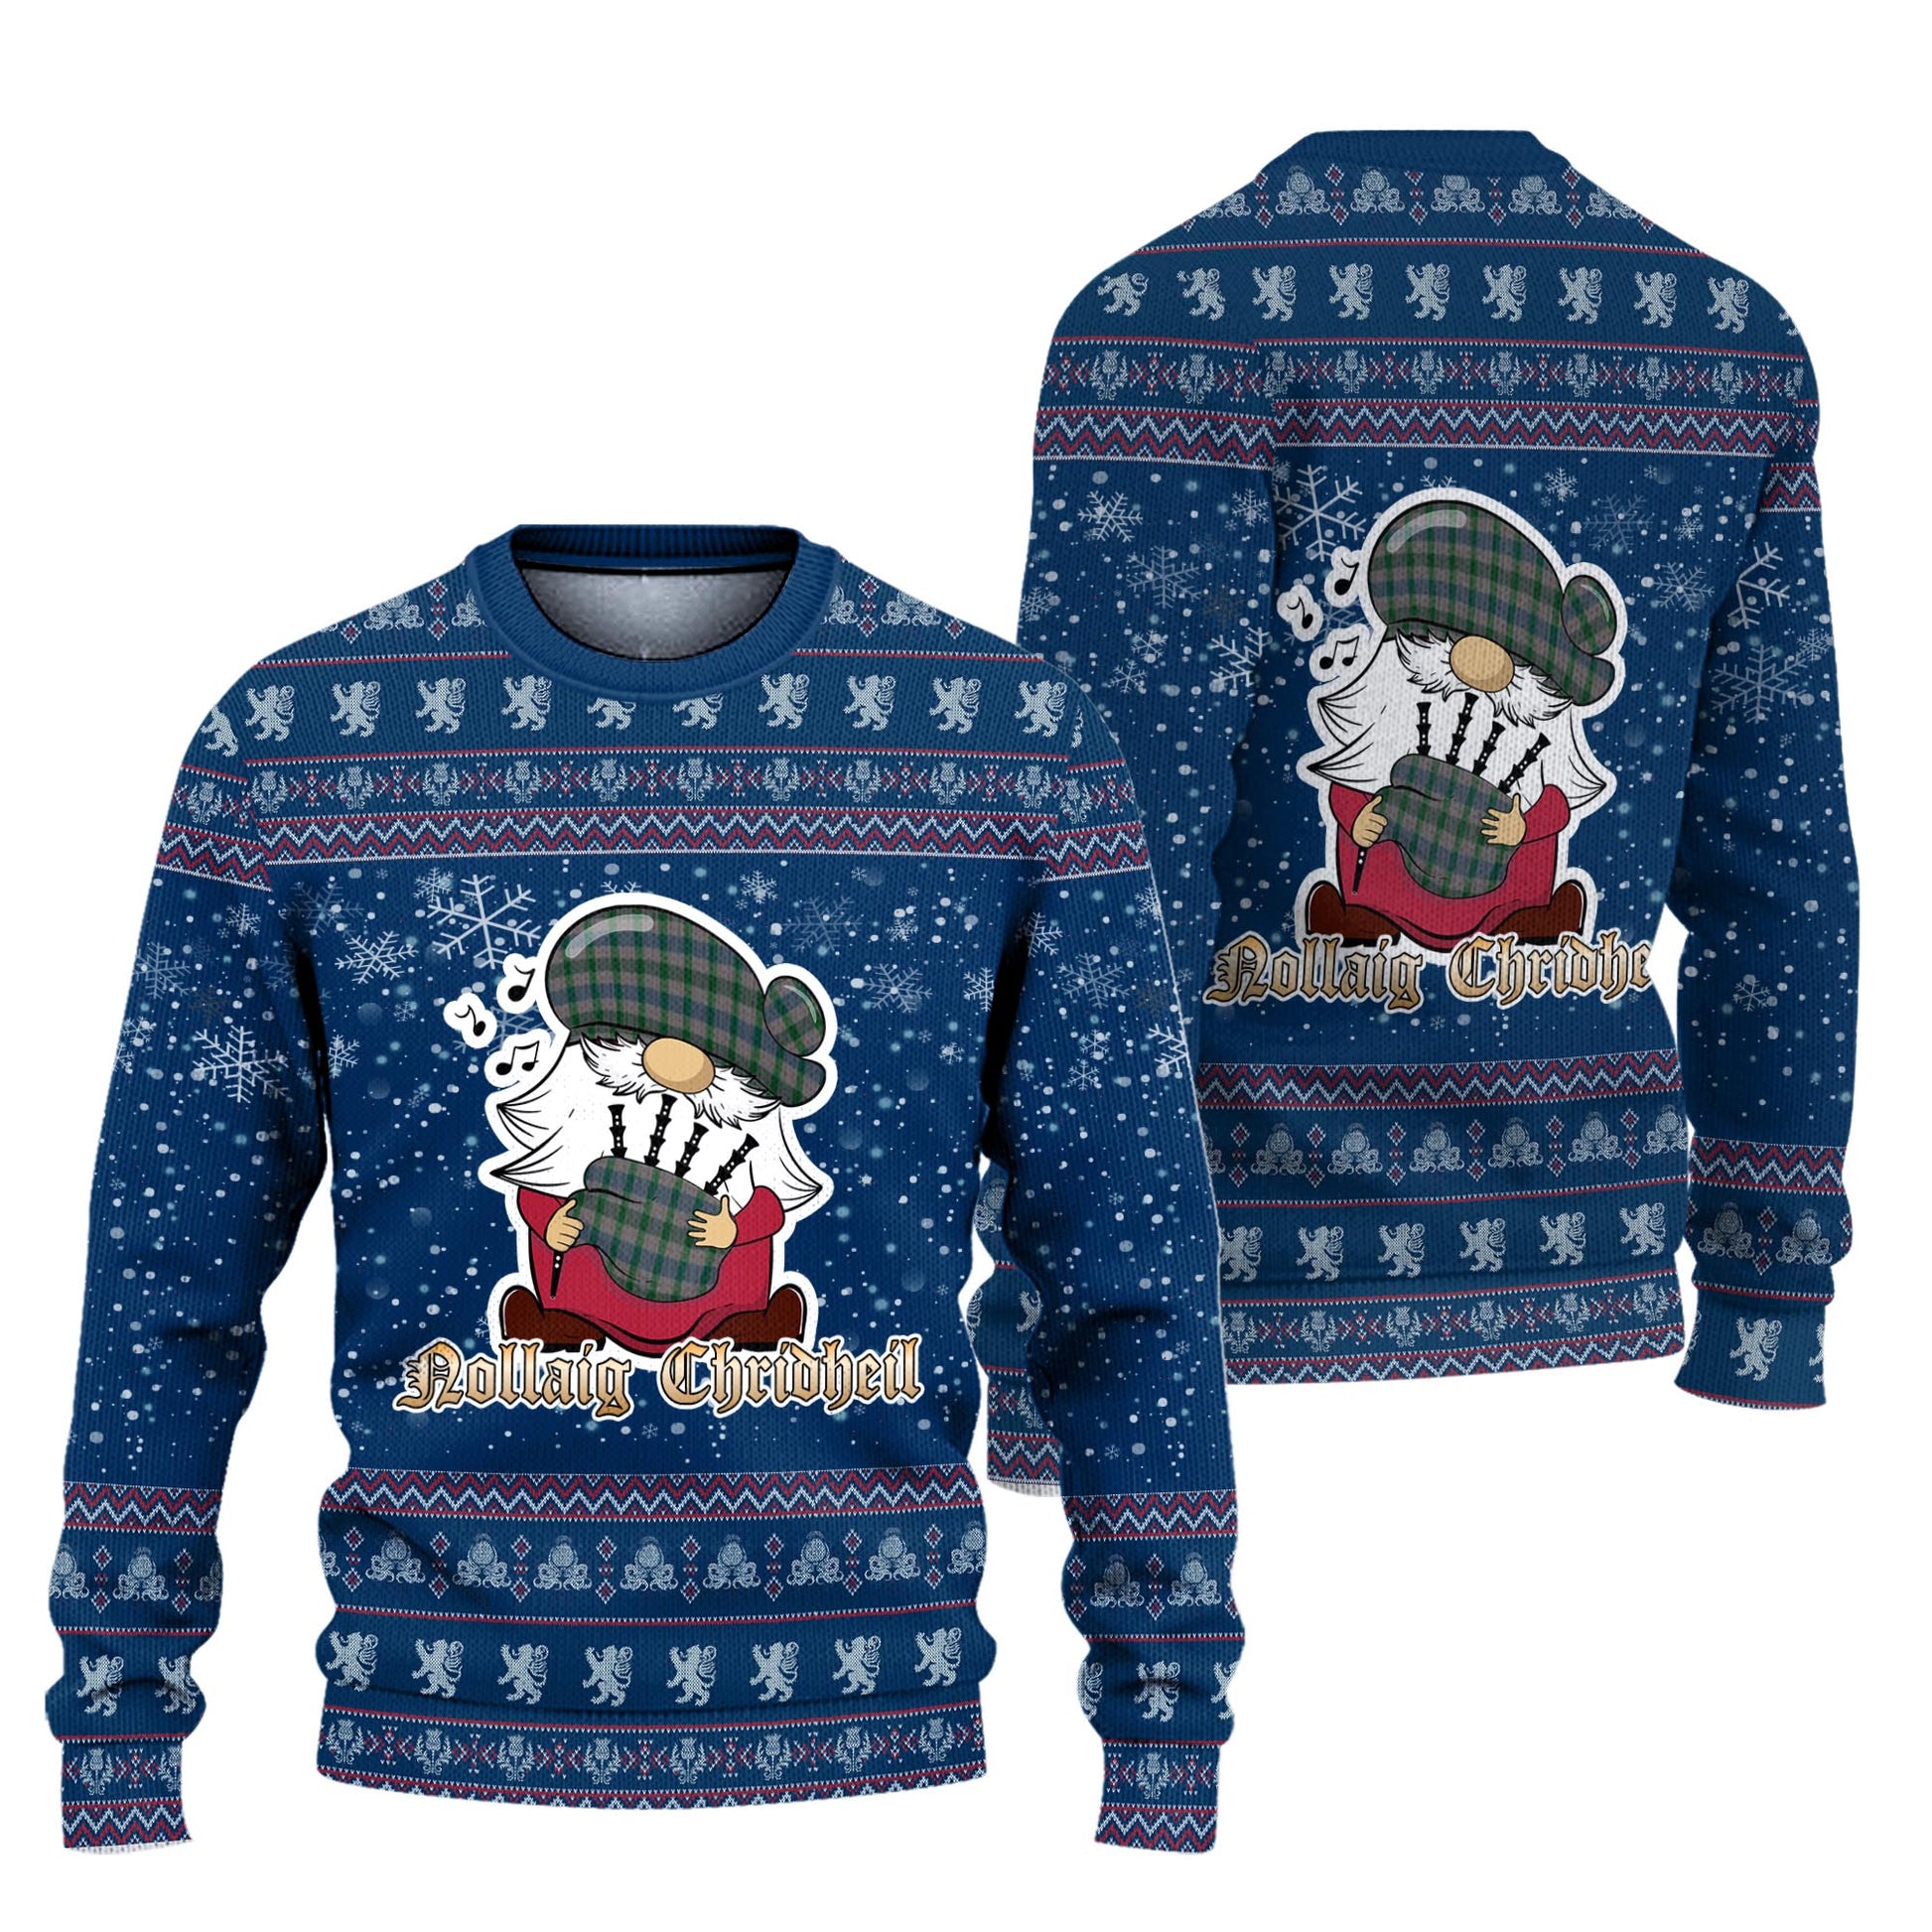 Lloyd of Wales Clan Christmas Family Knitted Sweater with Funny Gnome Playing Bagpipes Unisex Blue - Tartanvibesclothing